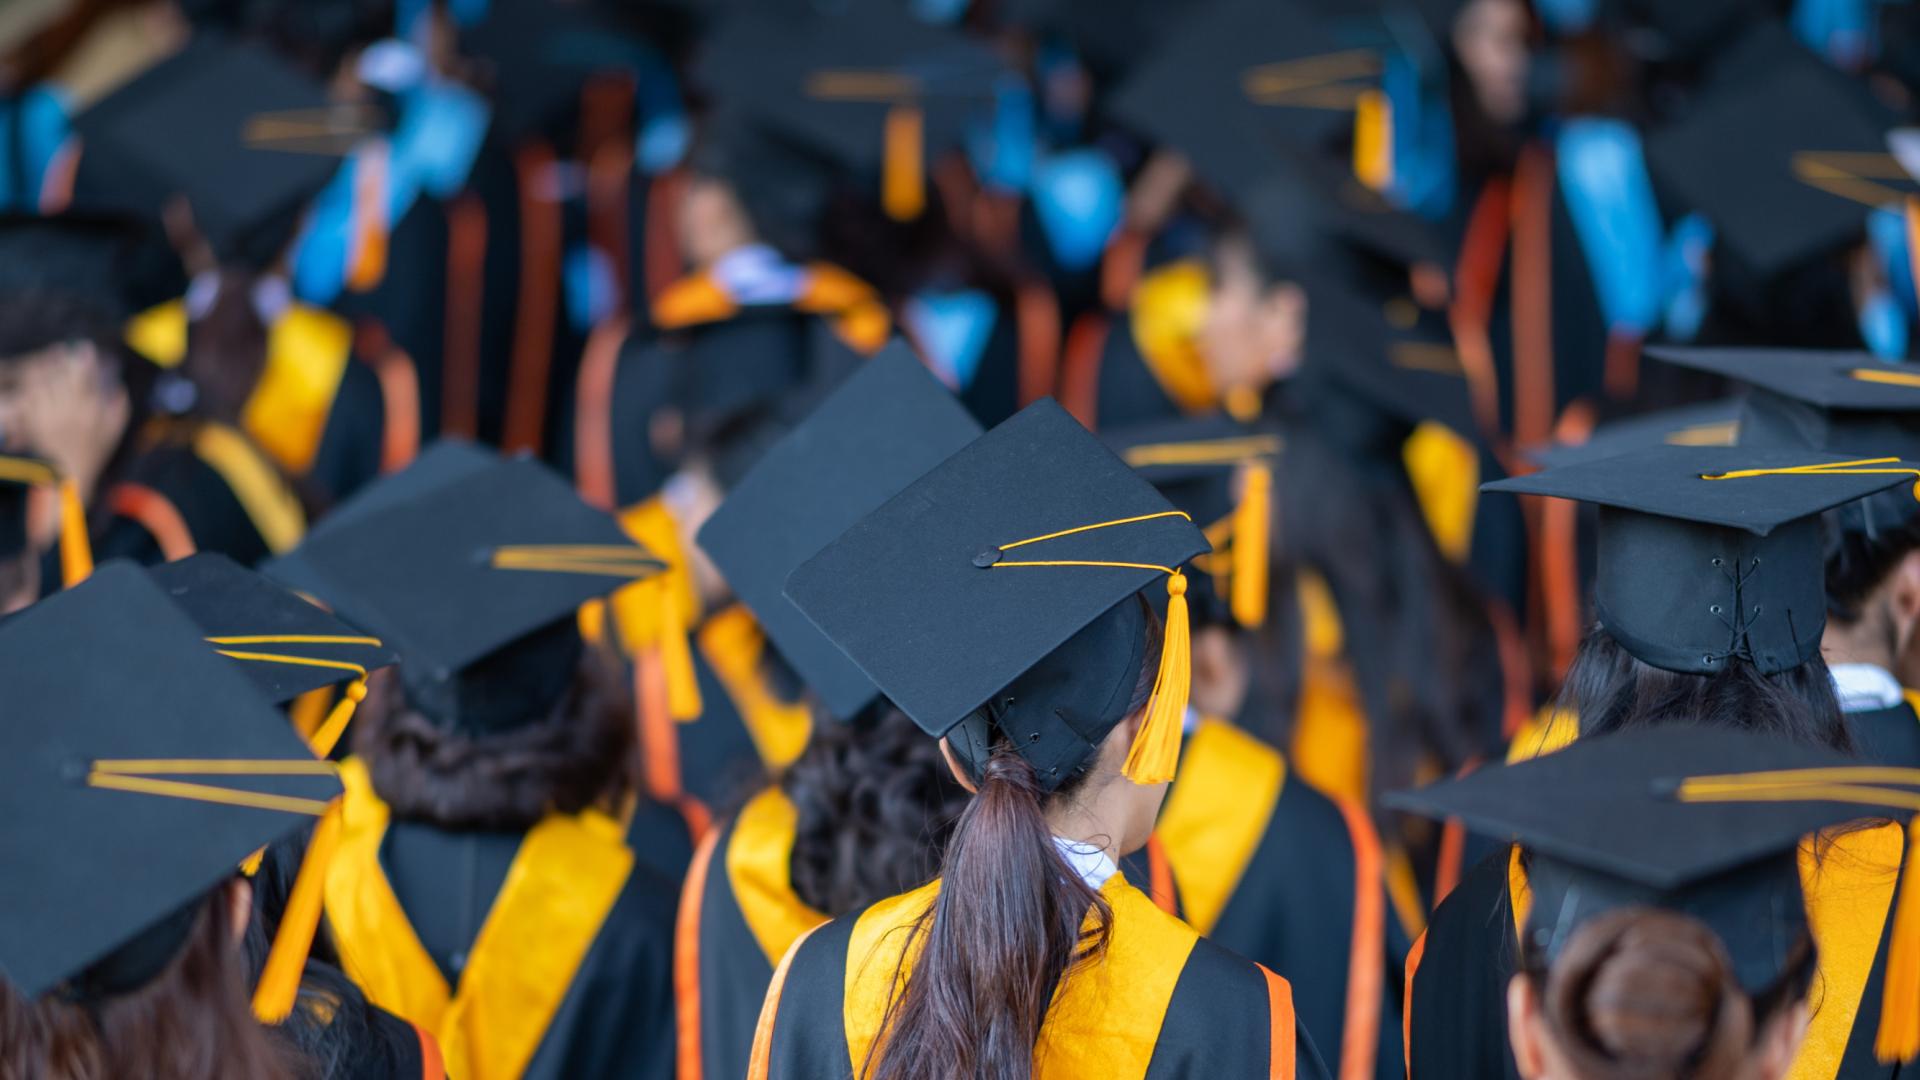 An image of students dressed for graduation